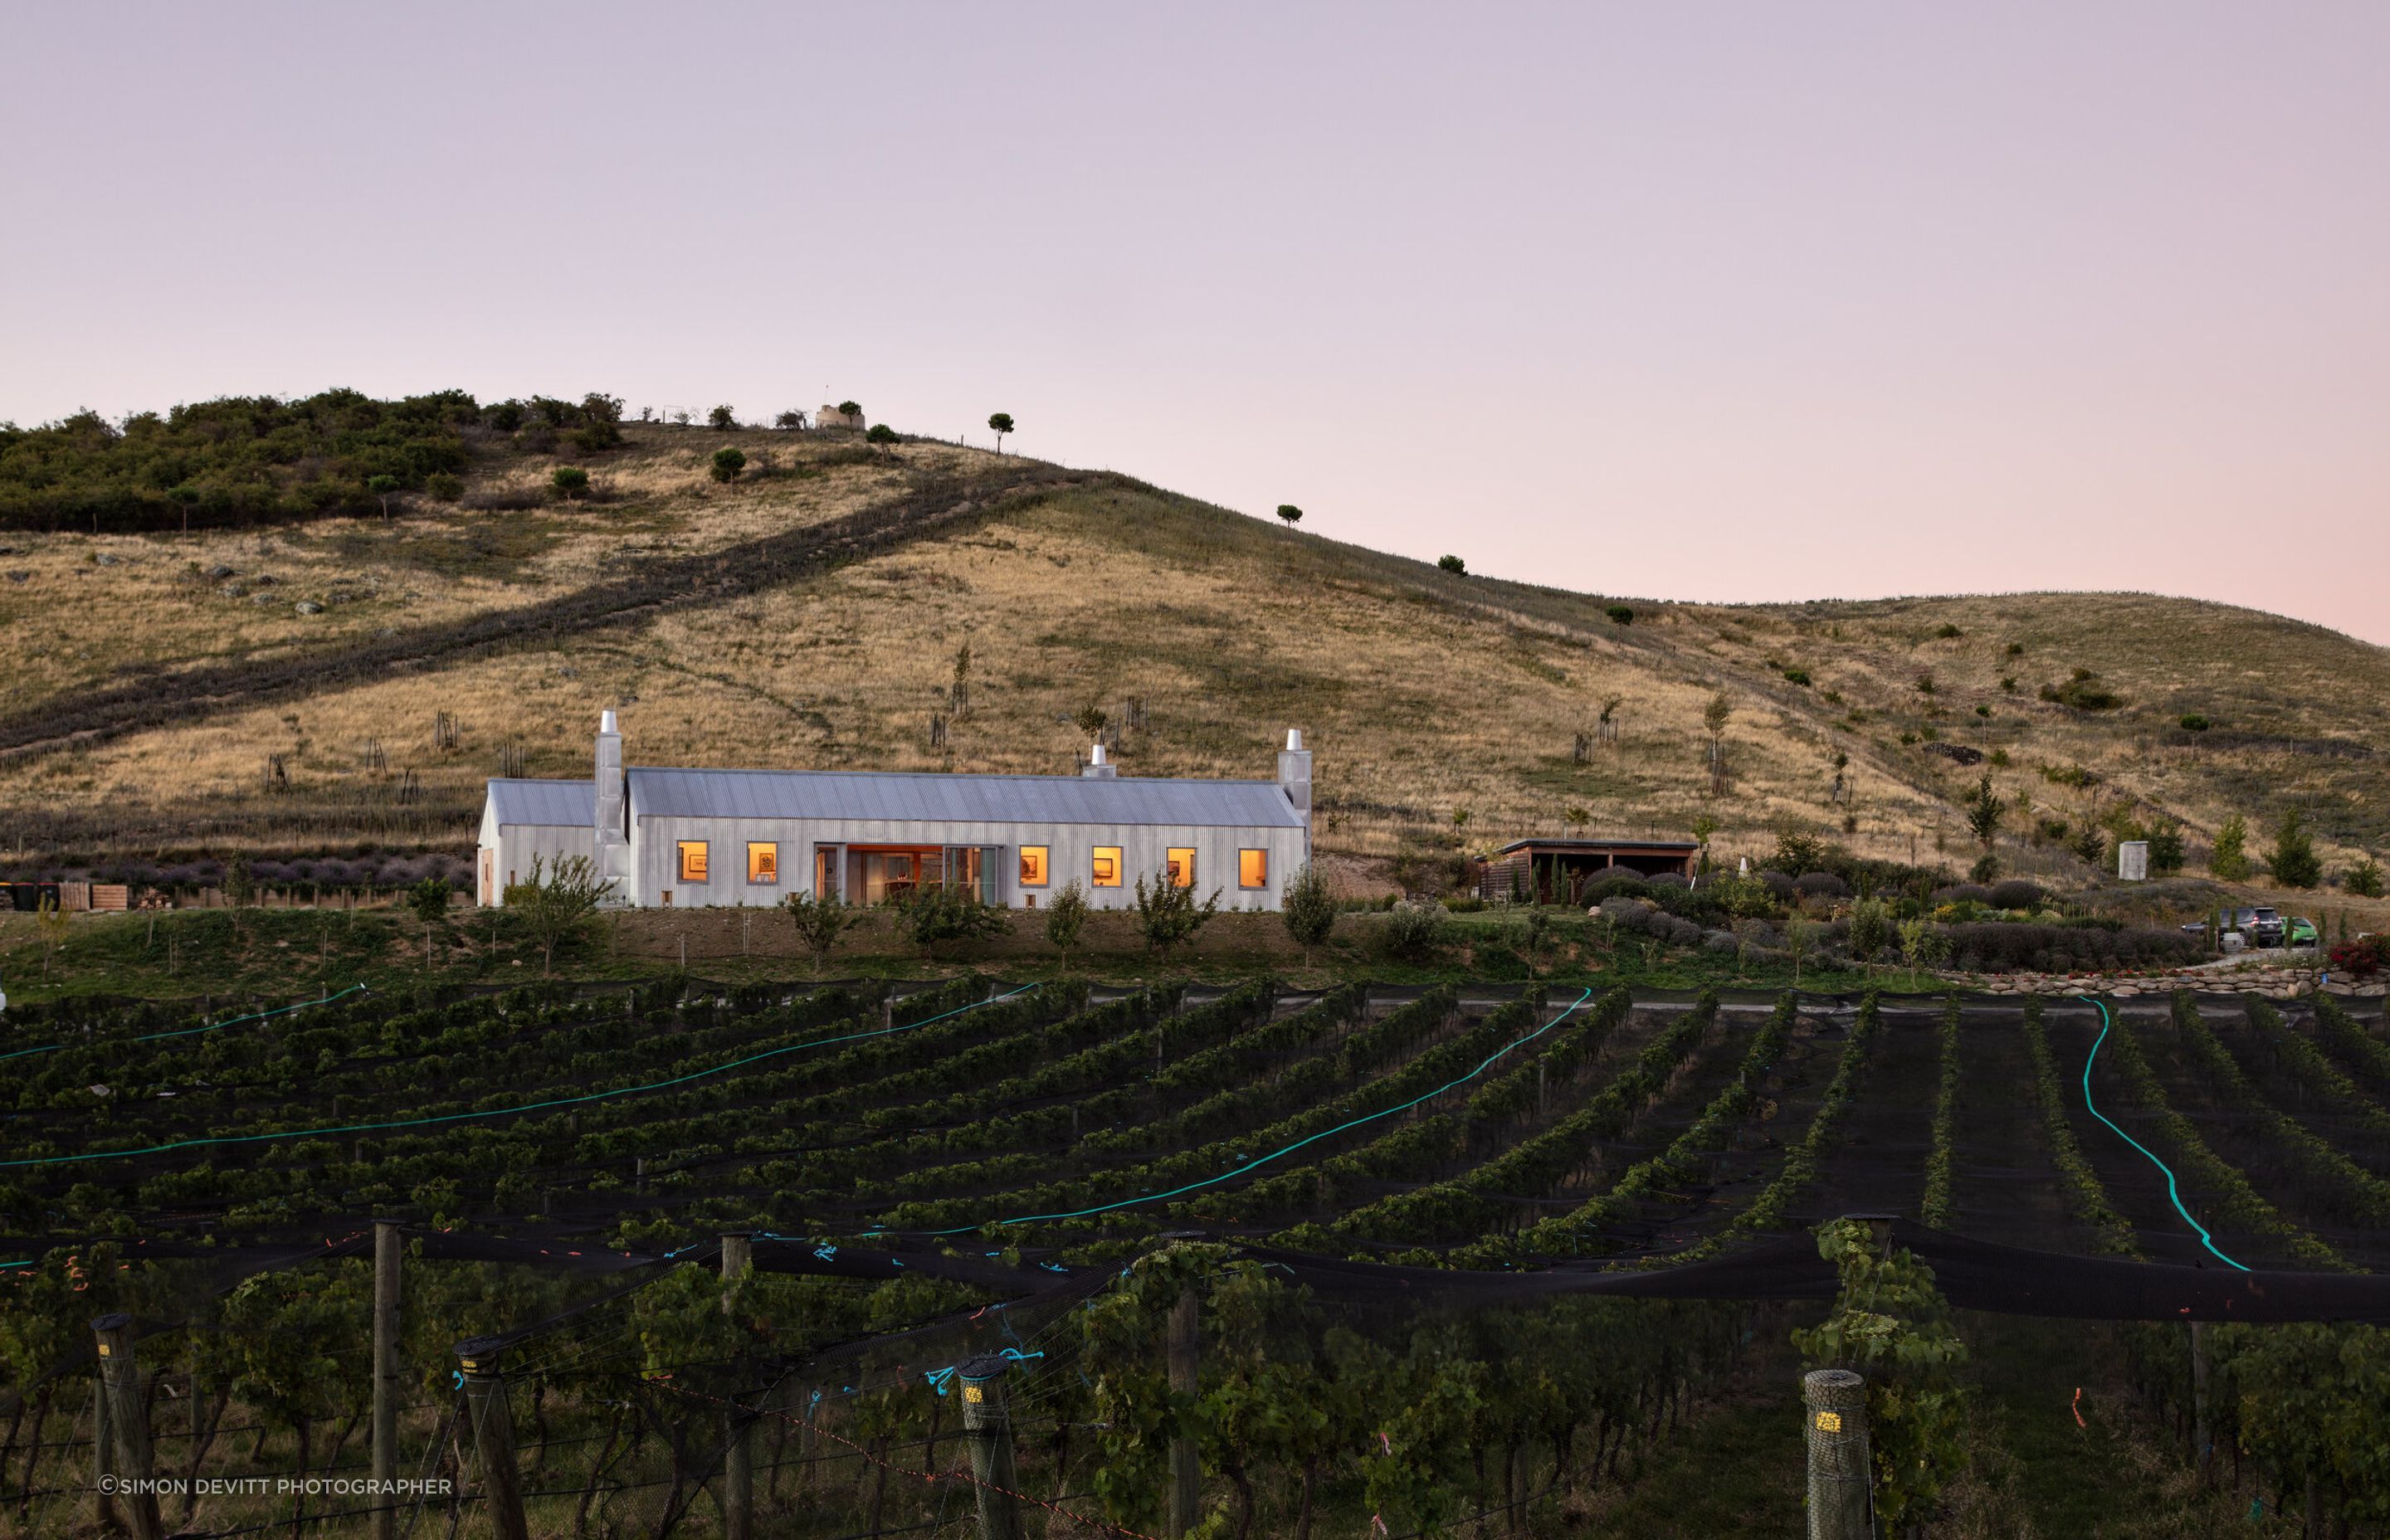 The Domaine Thomson Cellar Door buildings nestle into the hills overlooking the vineyard's pinot noir grapes and Lake Dunstan in Cromwell.